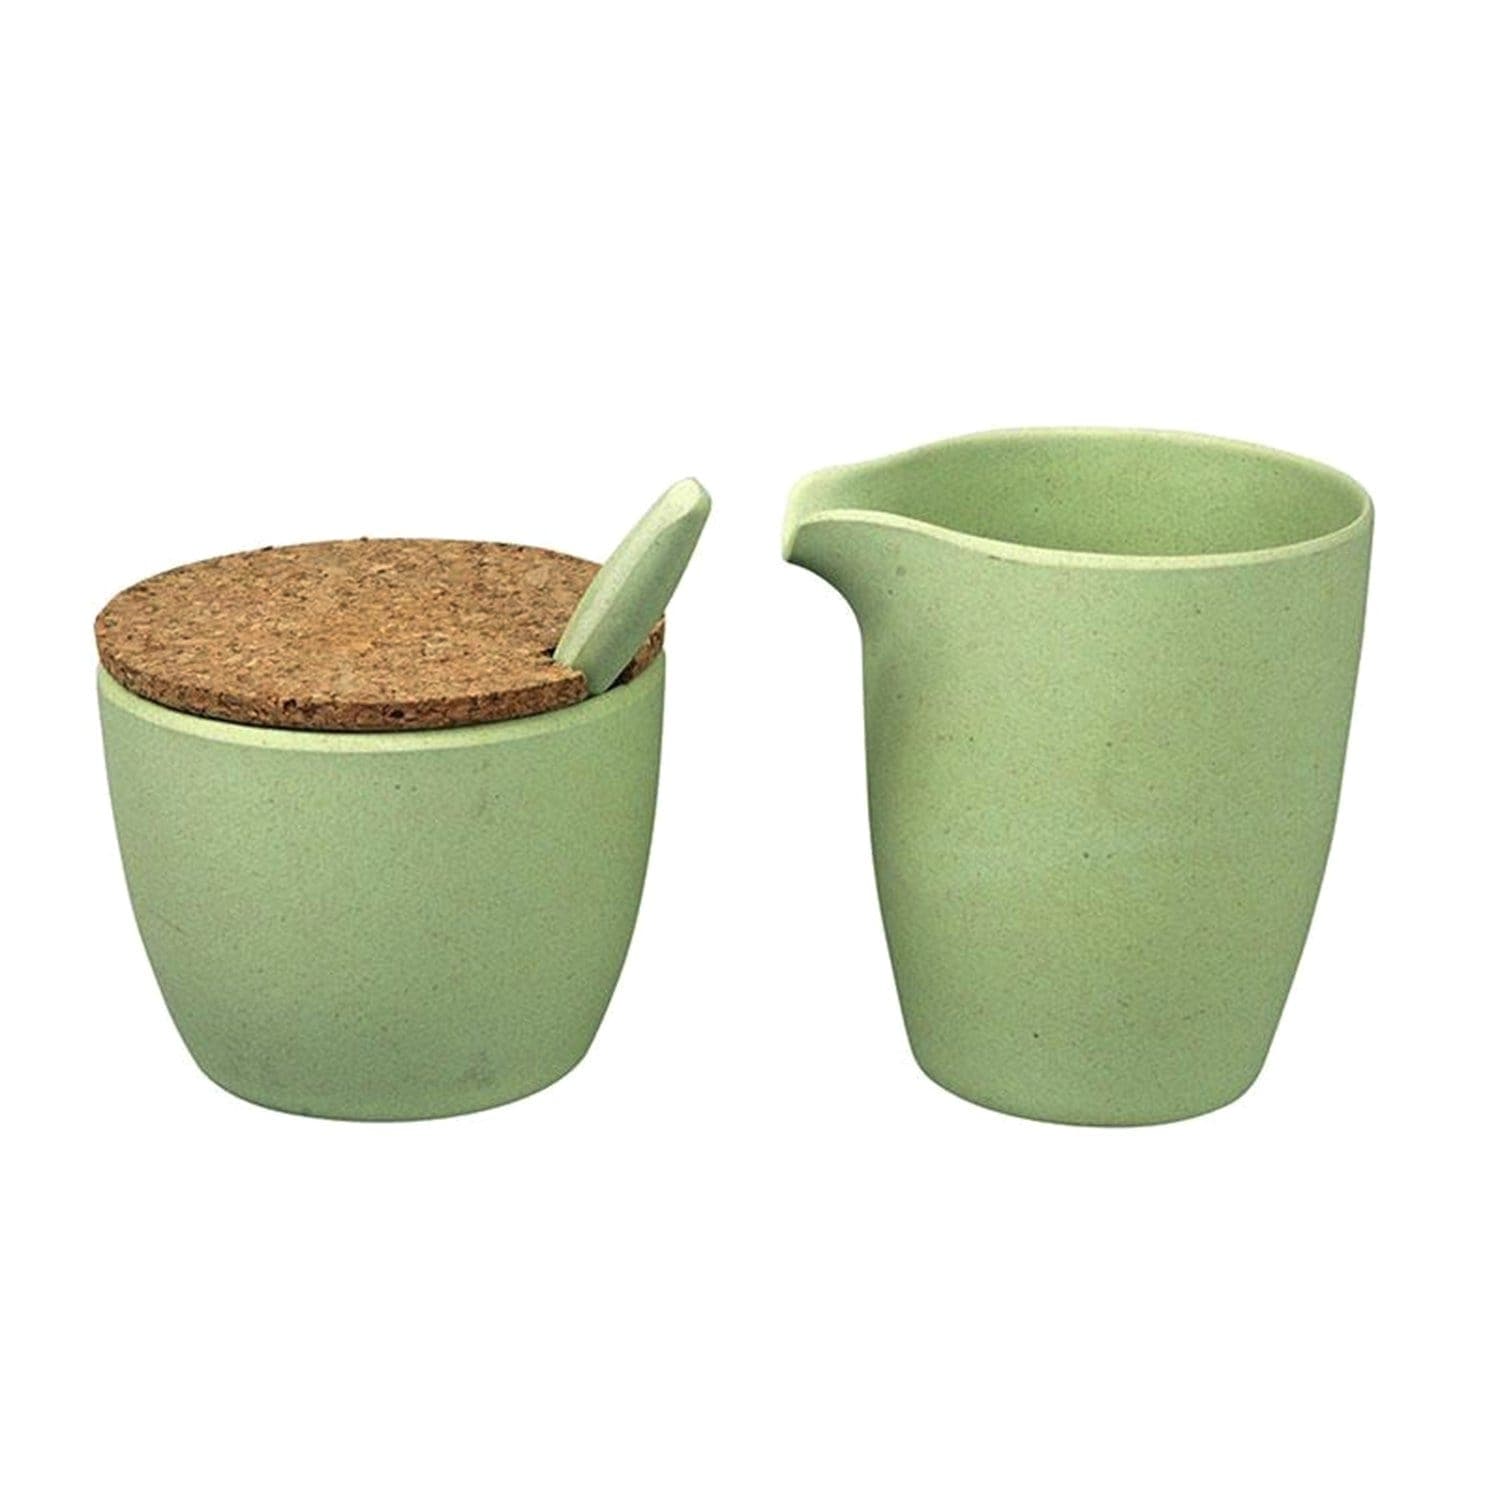 Zuperzozial Dash and Dulce Milk Cup and Sugar Pot Set - White Green - 1400621 - Jashanmal Home